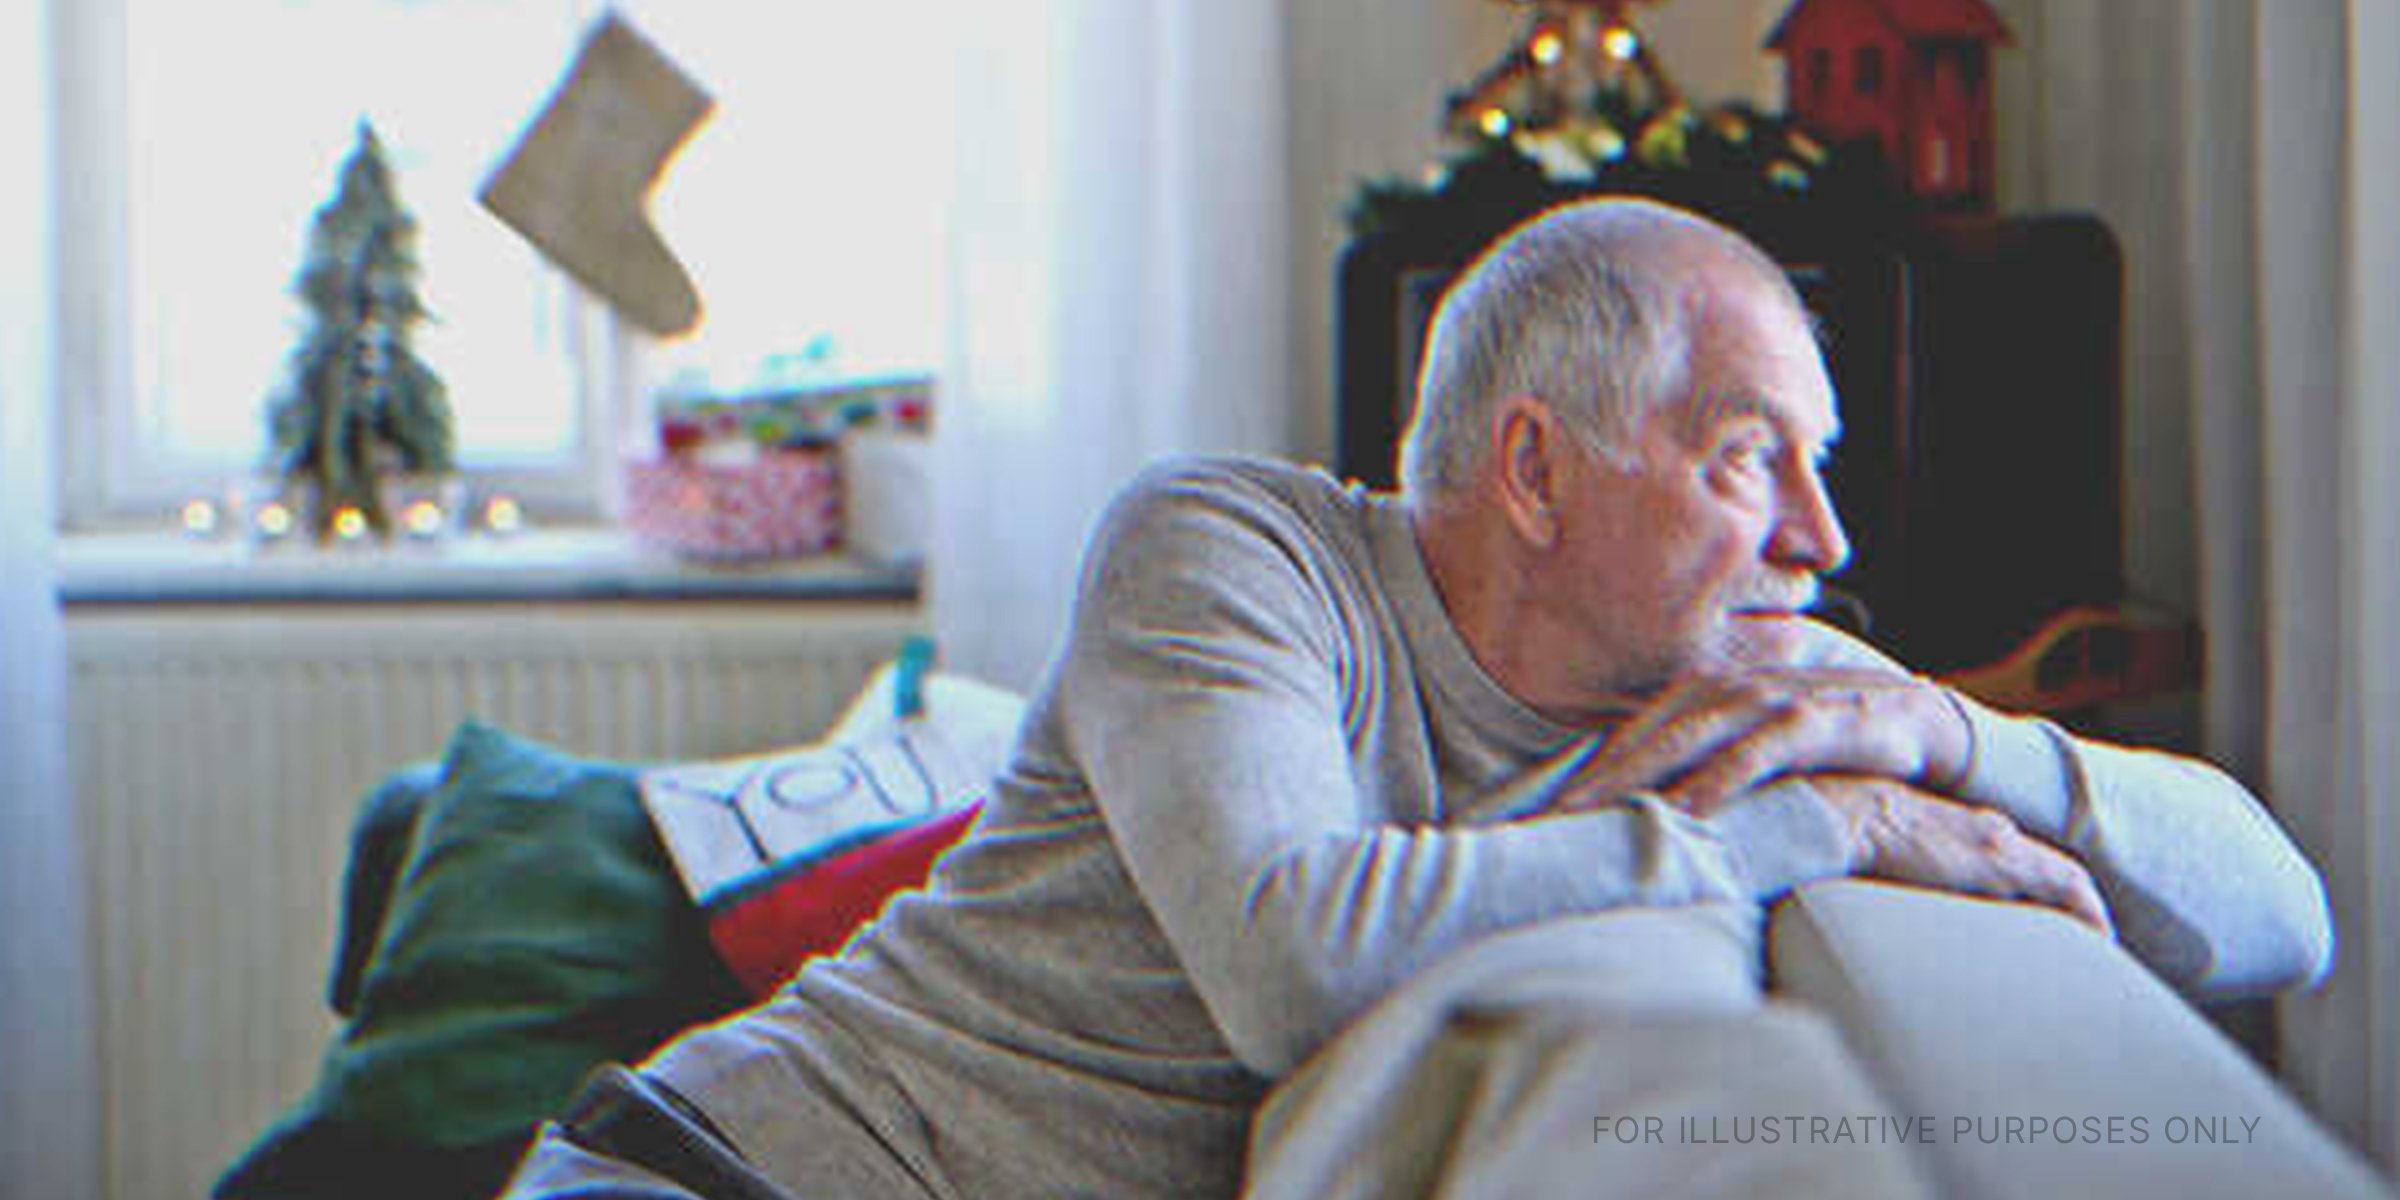 A lonely old man during Christmas. | Source: Shutterstock